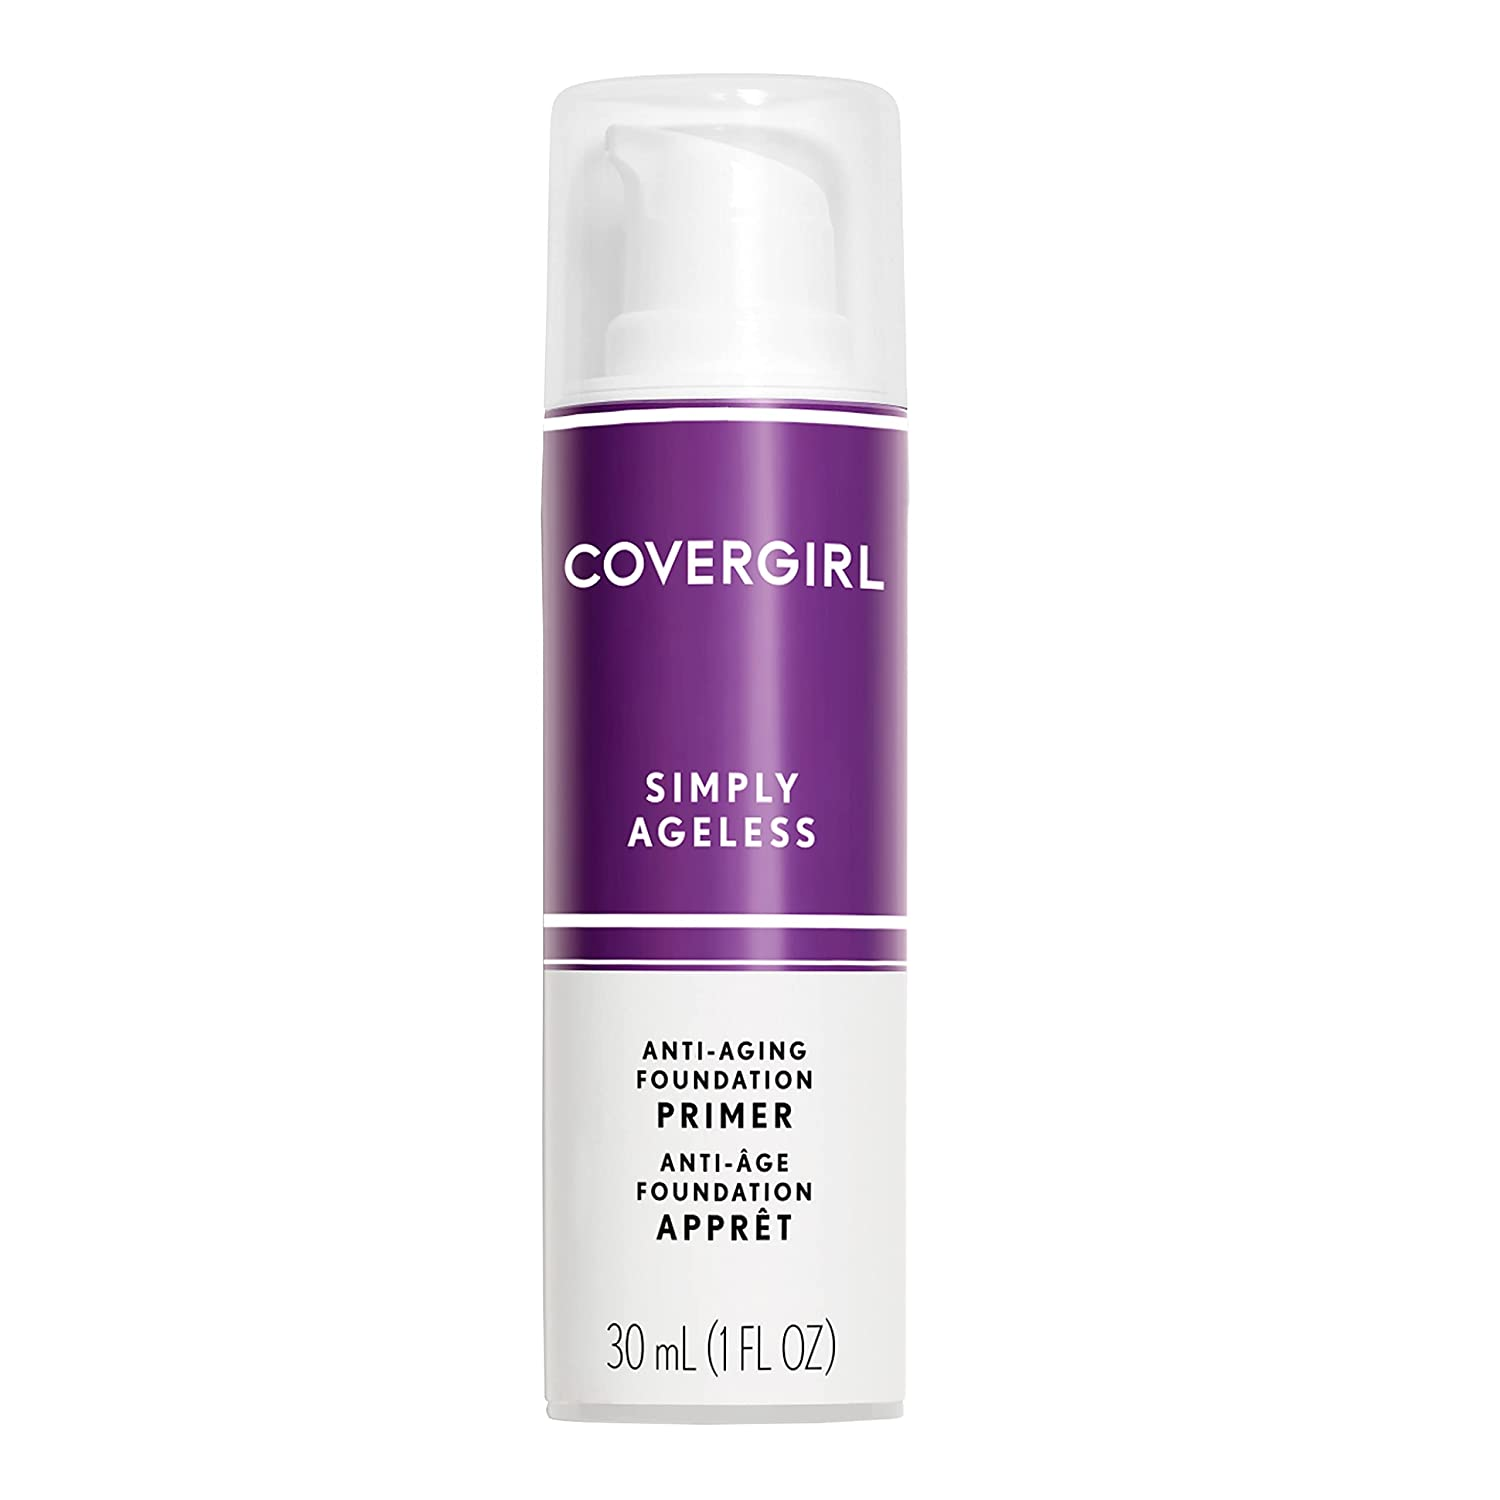 COVERGIRL & Olay Simply Ageless Makeup Primer has Nourishing formula keeps skin feeling fresh and hydrated 